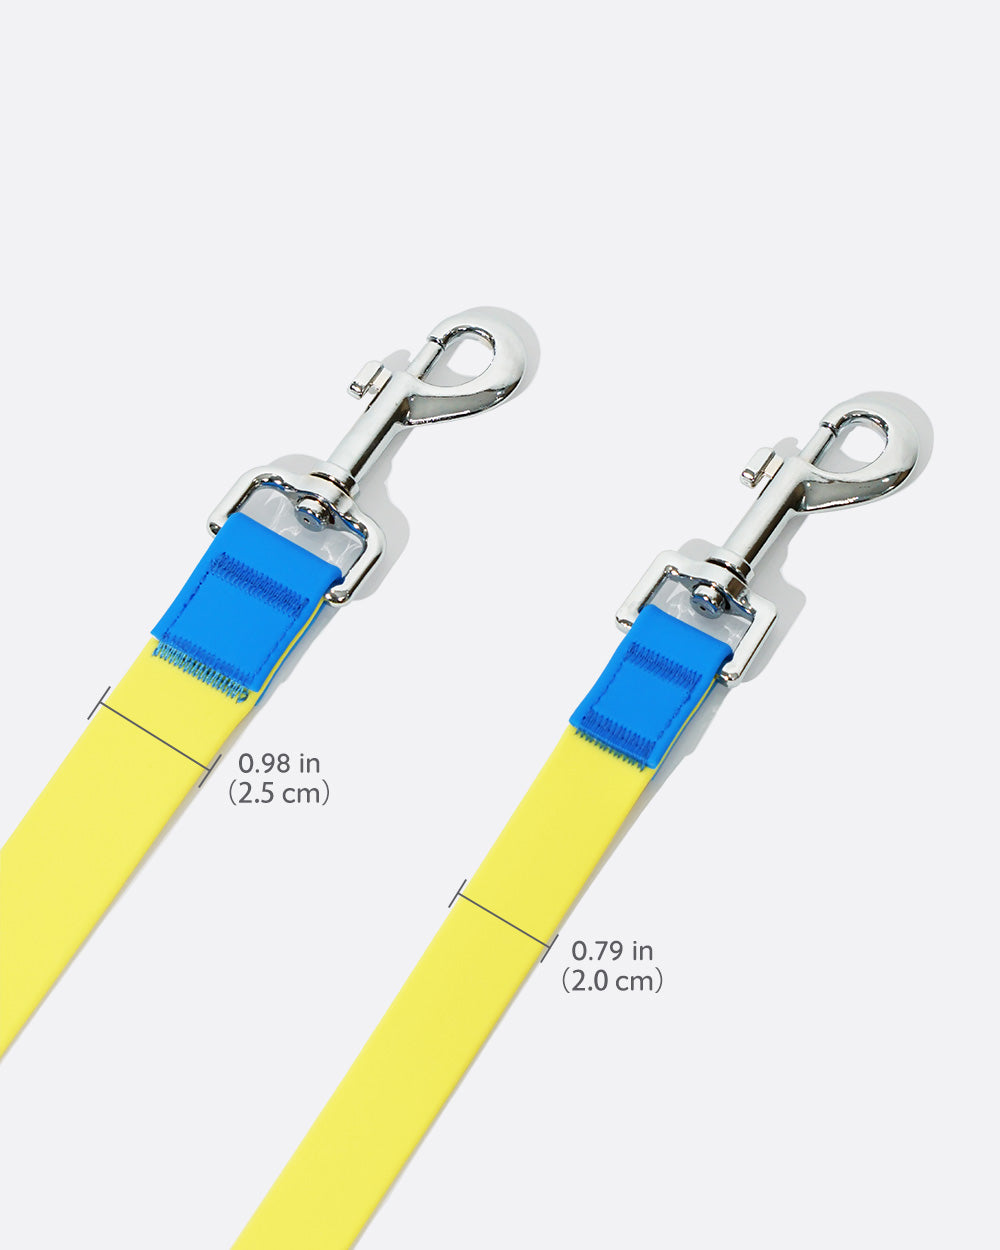 A PVC waterproof dog leash with a 5 ft length, featuring a 360° rotating metal clasp, available in two width specifications: 2cm and 2.5 cm.